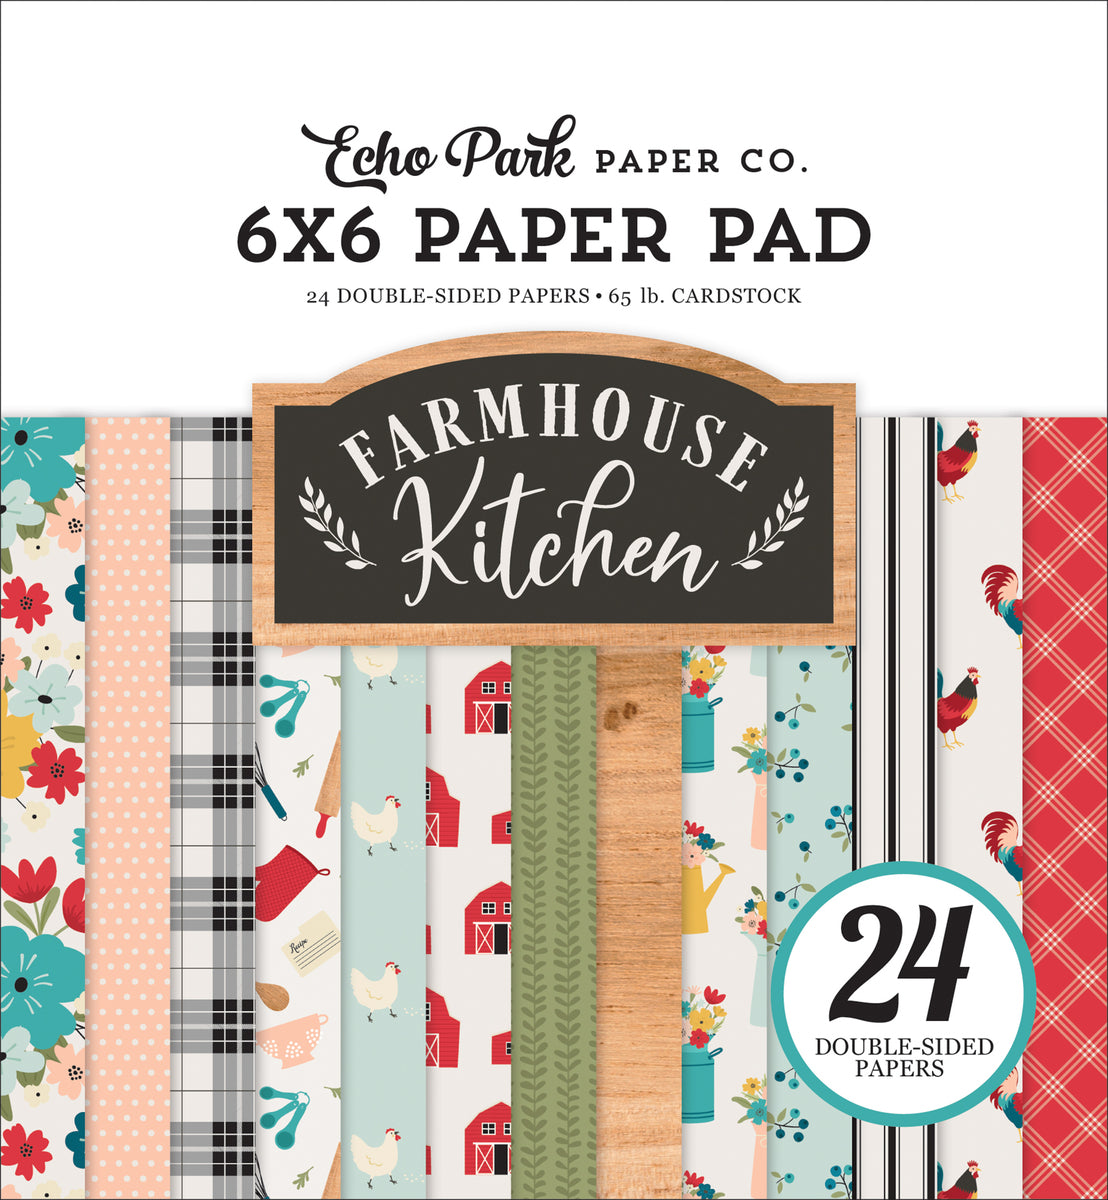 Farmhouse Kitchen - 6x6 paper pad with 24 double-sided sheets - Echo Park Paper